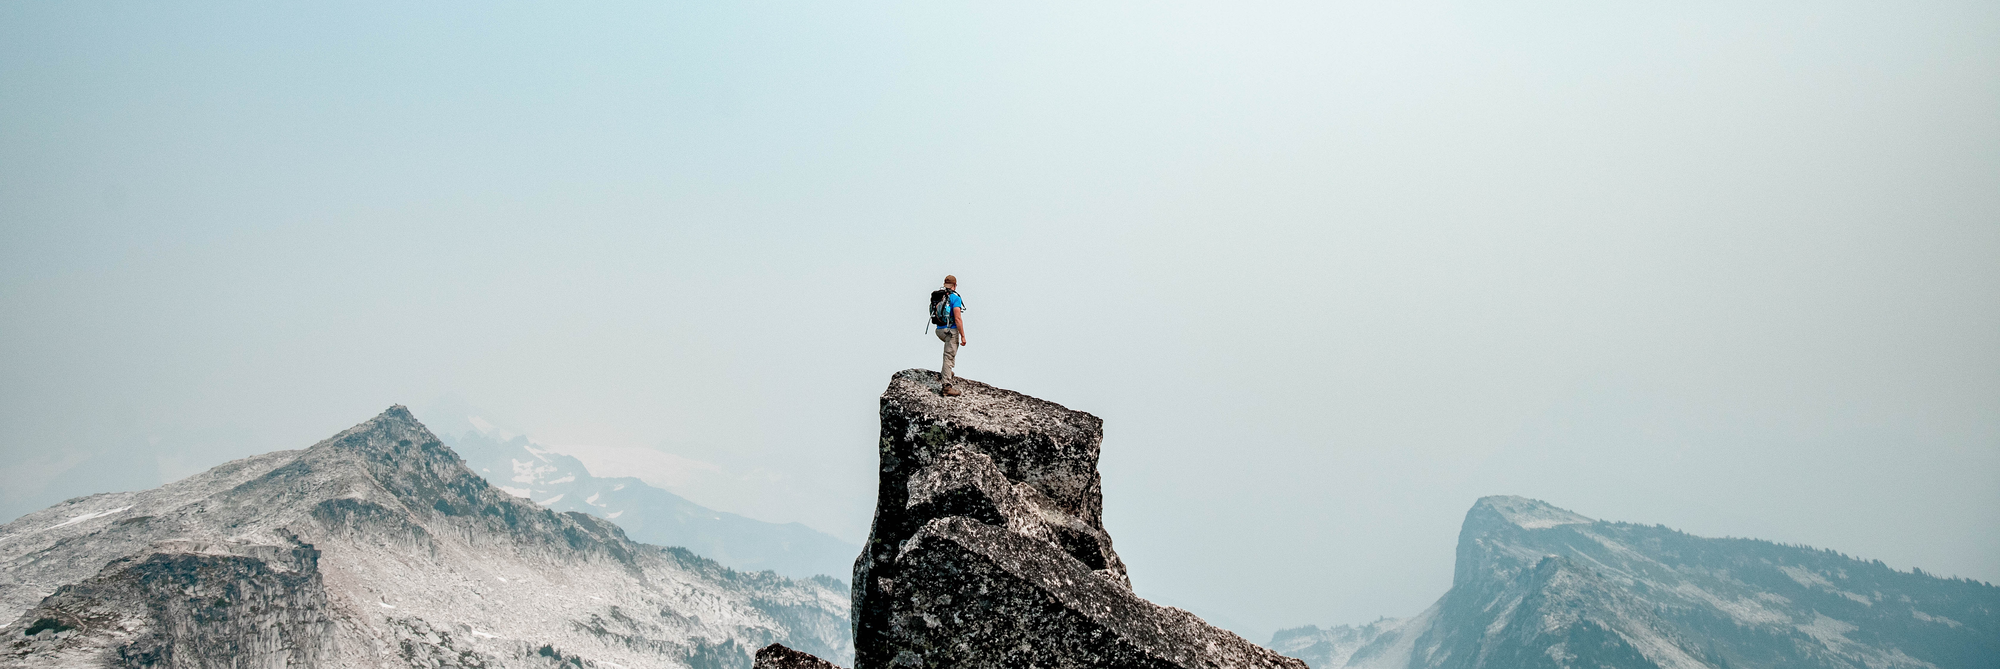 A person on top of a mountain indicating their efforts have been successful